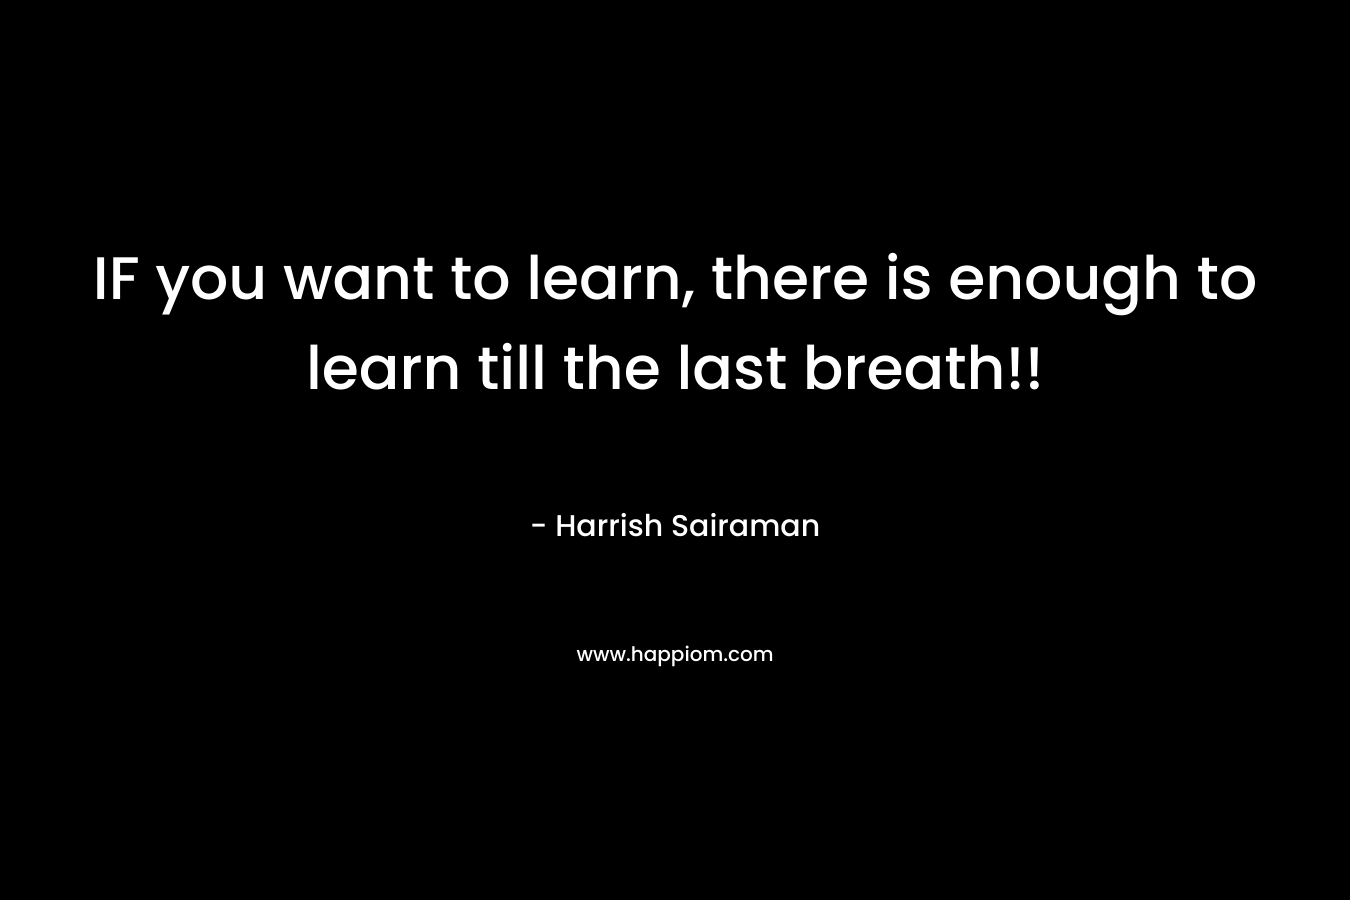 IF you want to learn, there is enough to learn till the last breath!!